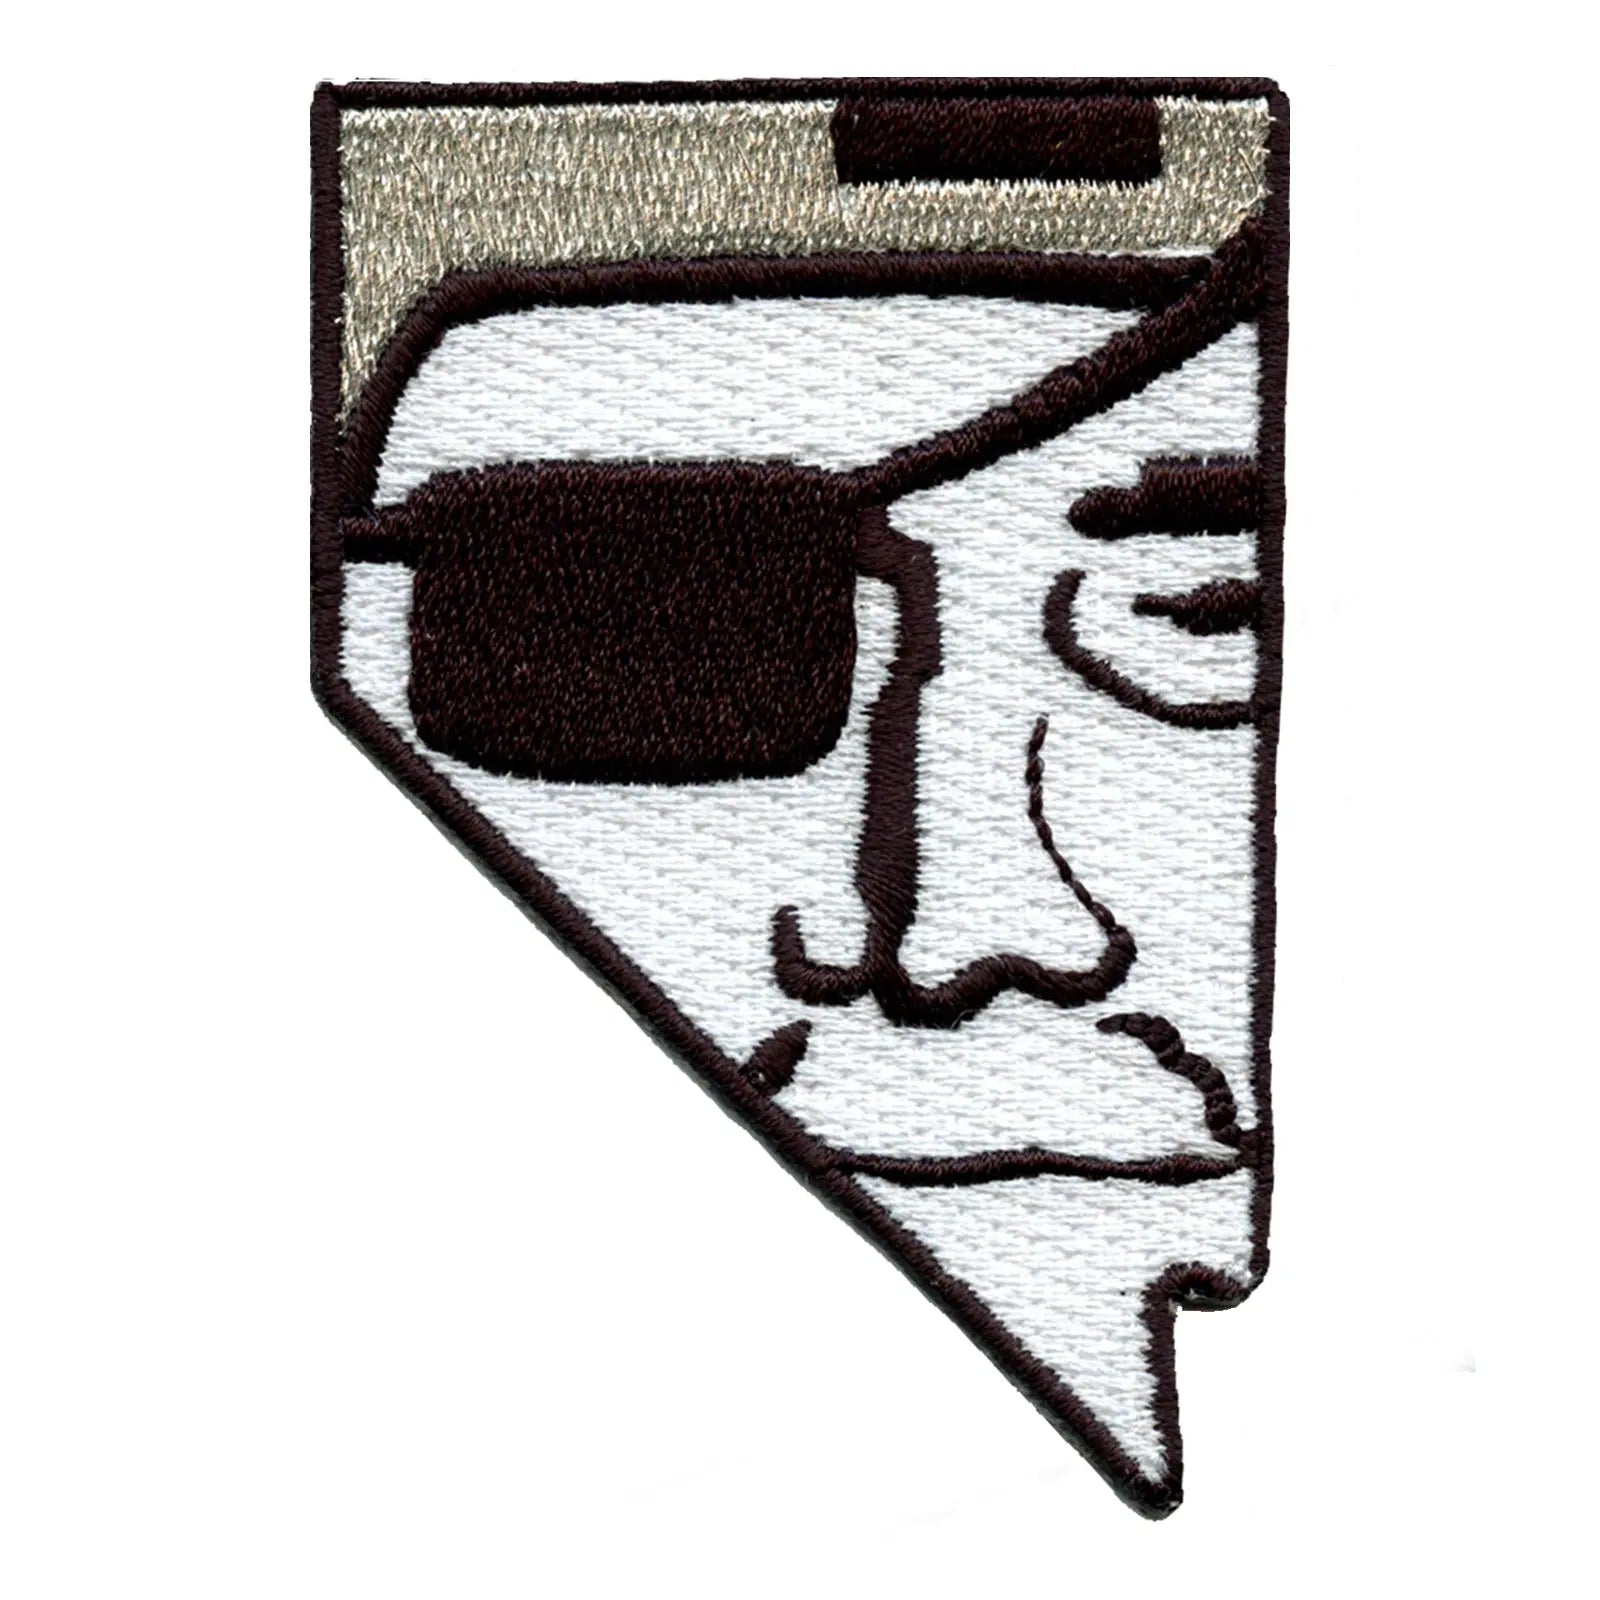 Las Vegas Football Team Parody Eye Patch State Iron On Embroidered Patch 